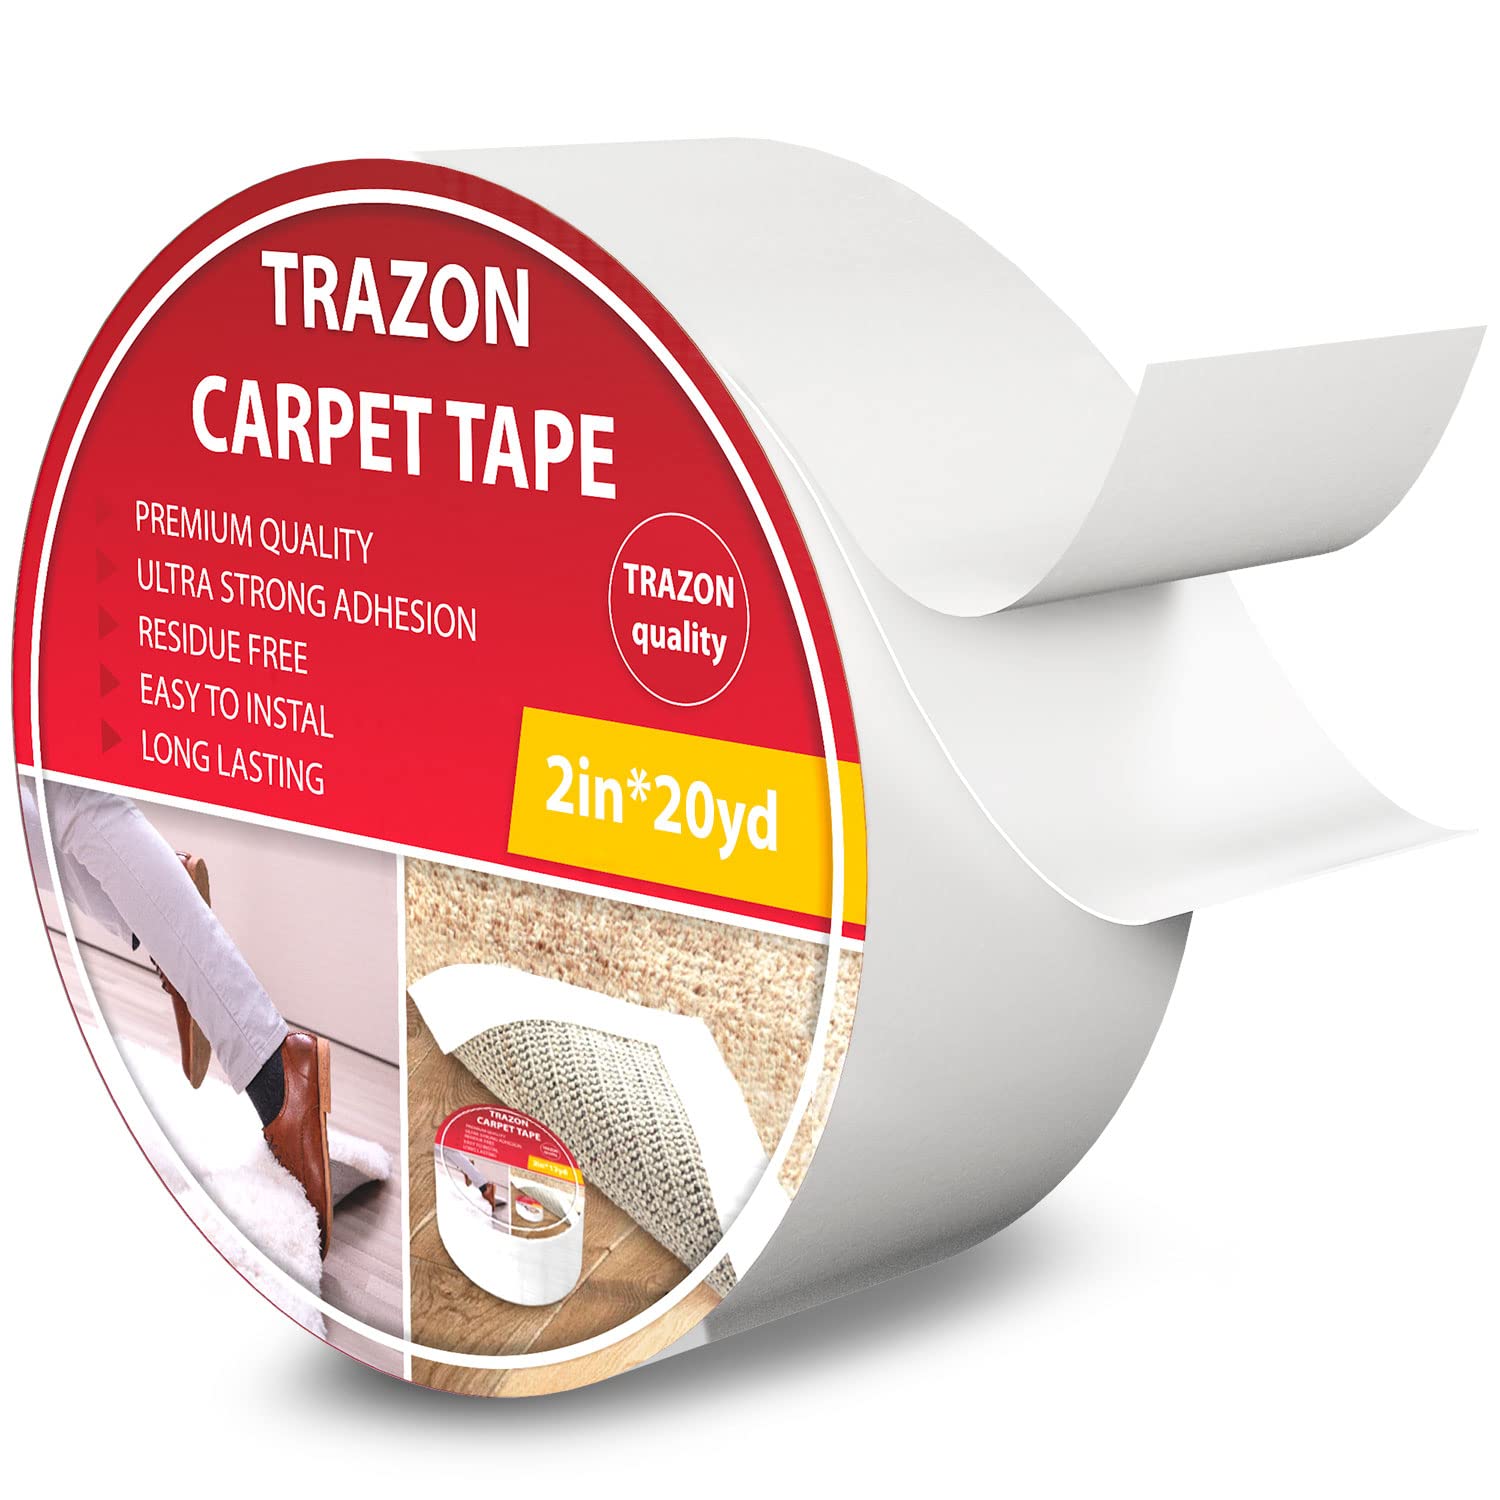 ADHES Double Side Carpet Tape Rug Tape for Carpet Wood Floor